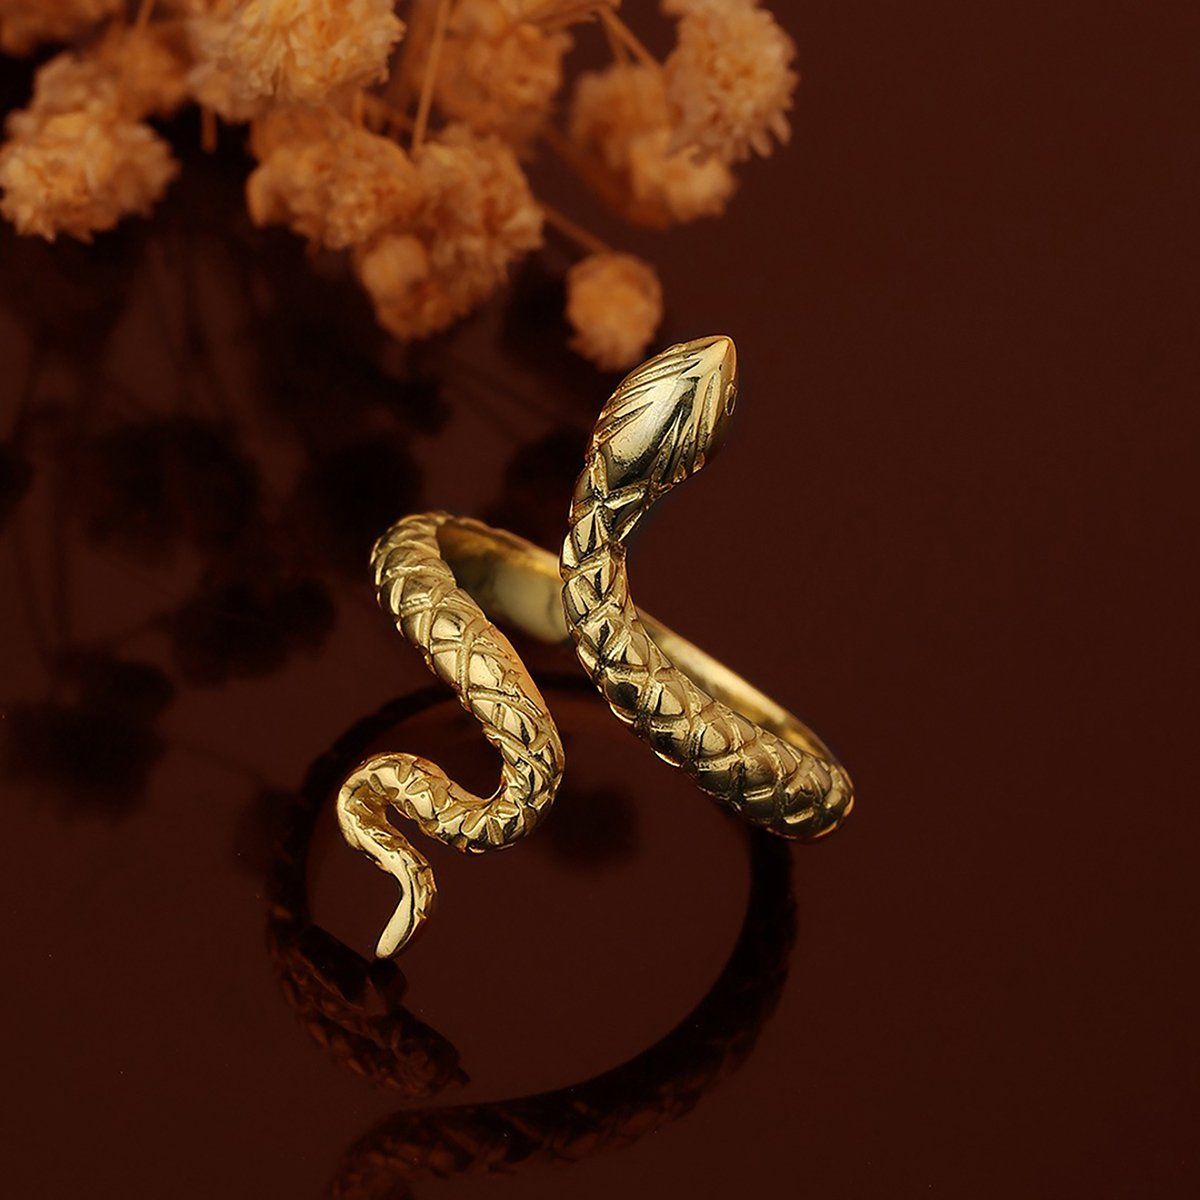 Amazon.com : ANYILVTULI Snake Rings Jewelry for Women Finger Ring Set  Silver : Beauty & Personal Care